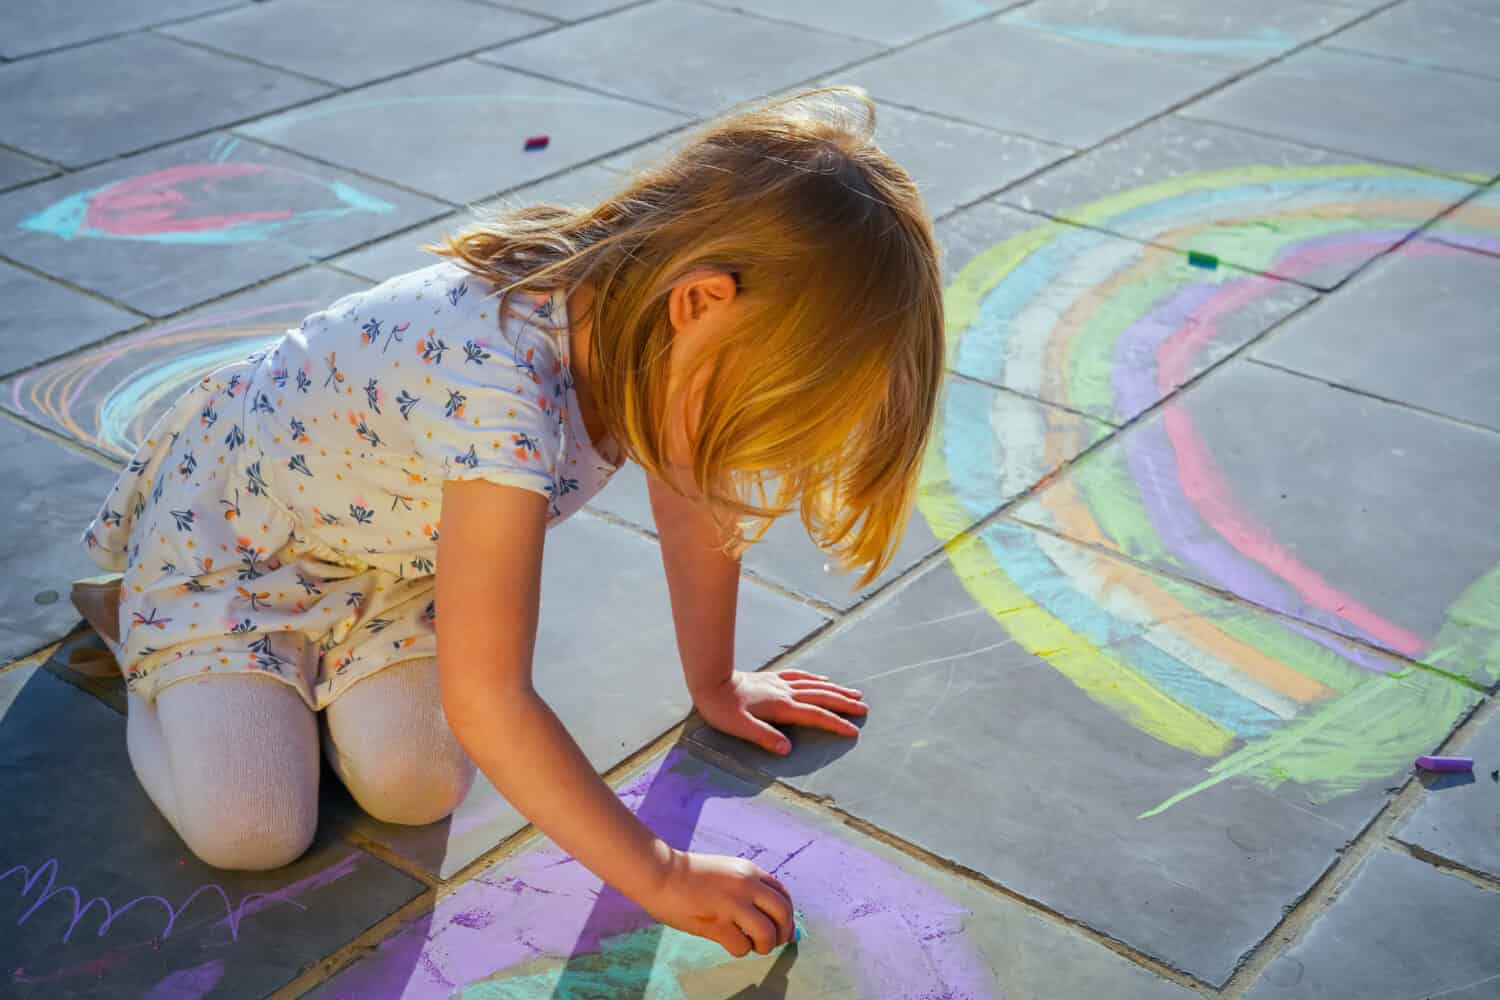 4 year old girl drawing a rainbow with chalks on floor